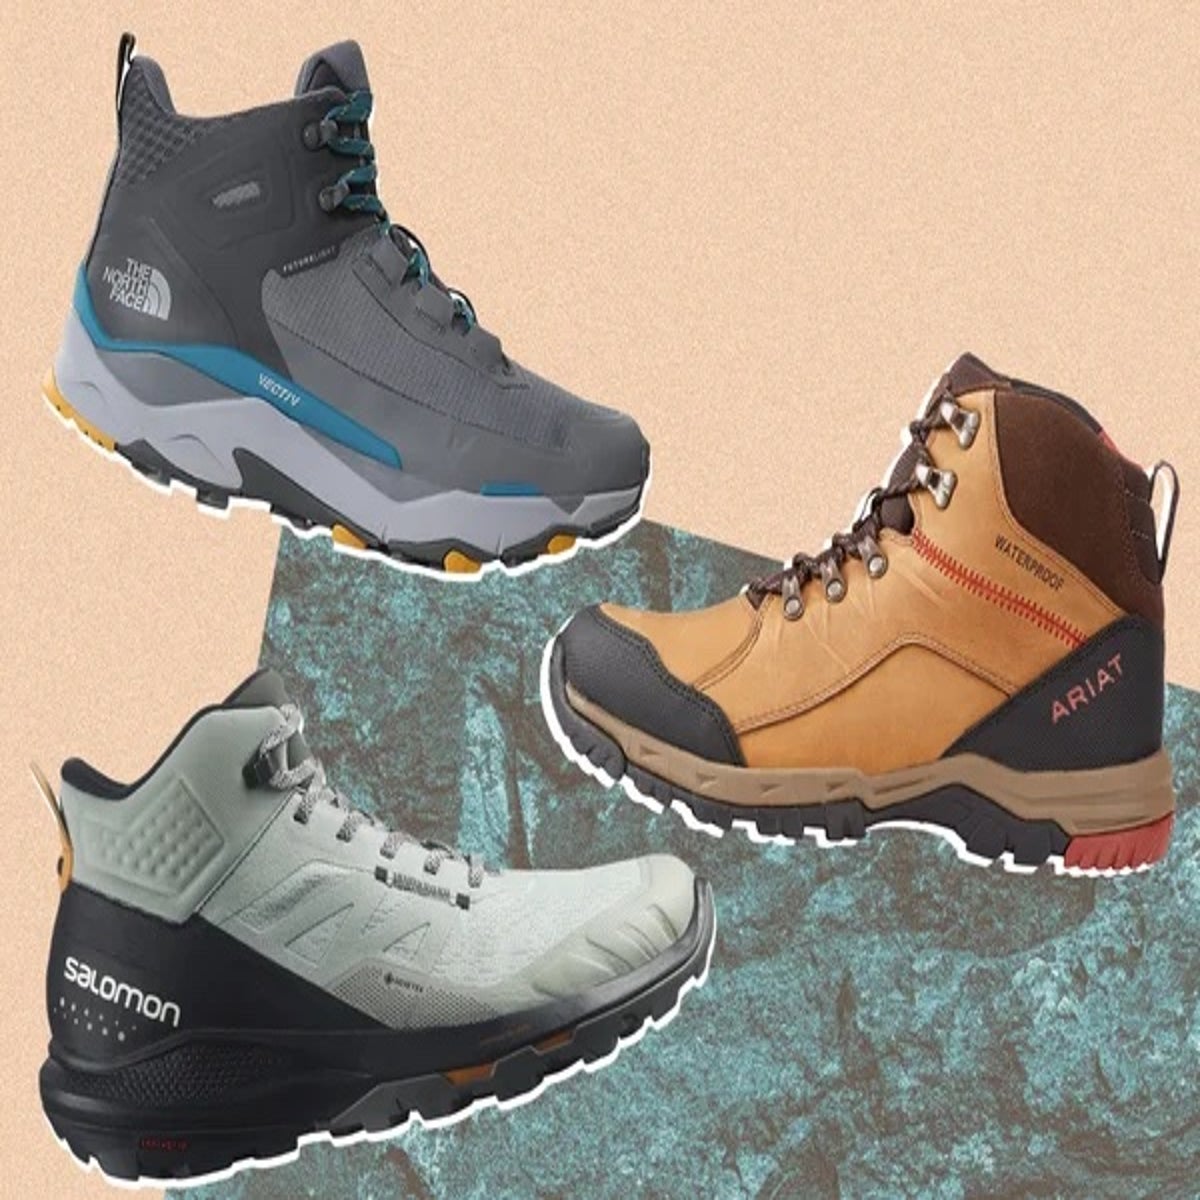 Best Walking Shoes for Men: What's Right for Your Feet?